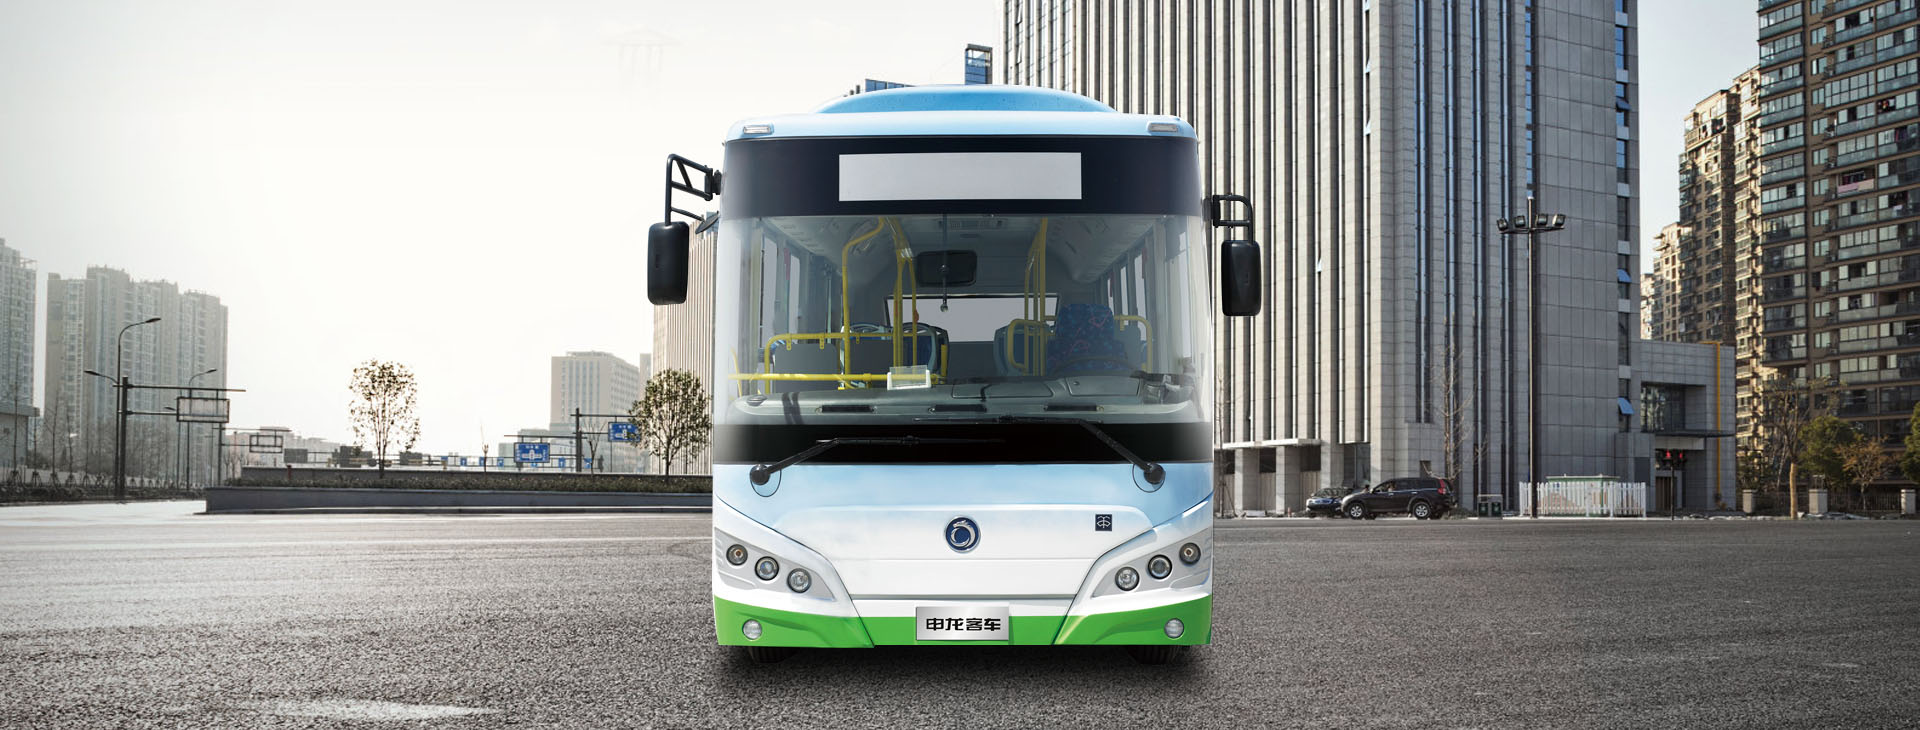 SLK6859 pure electric road bus